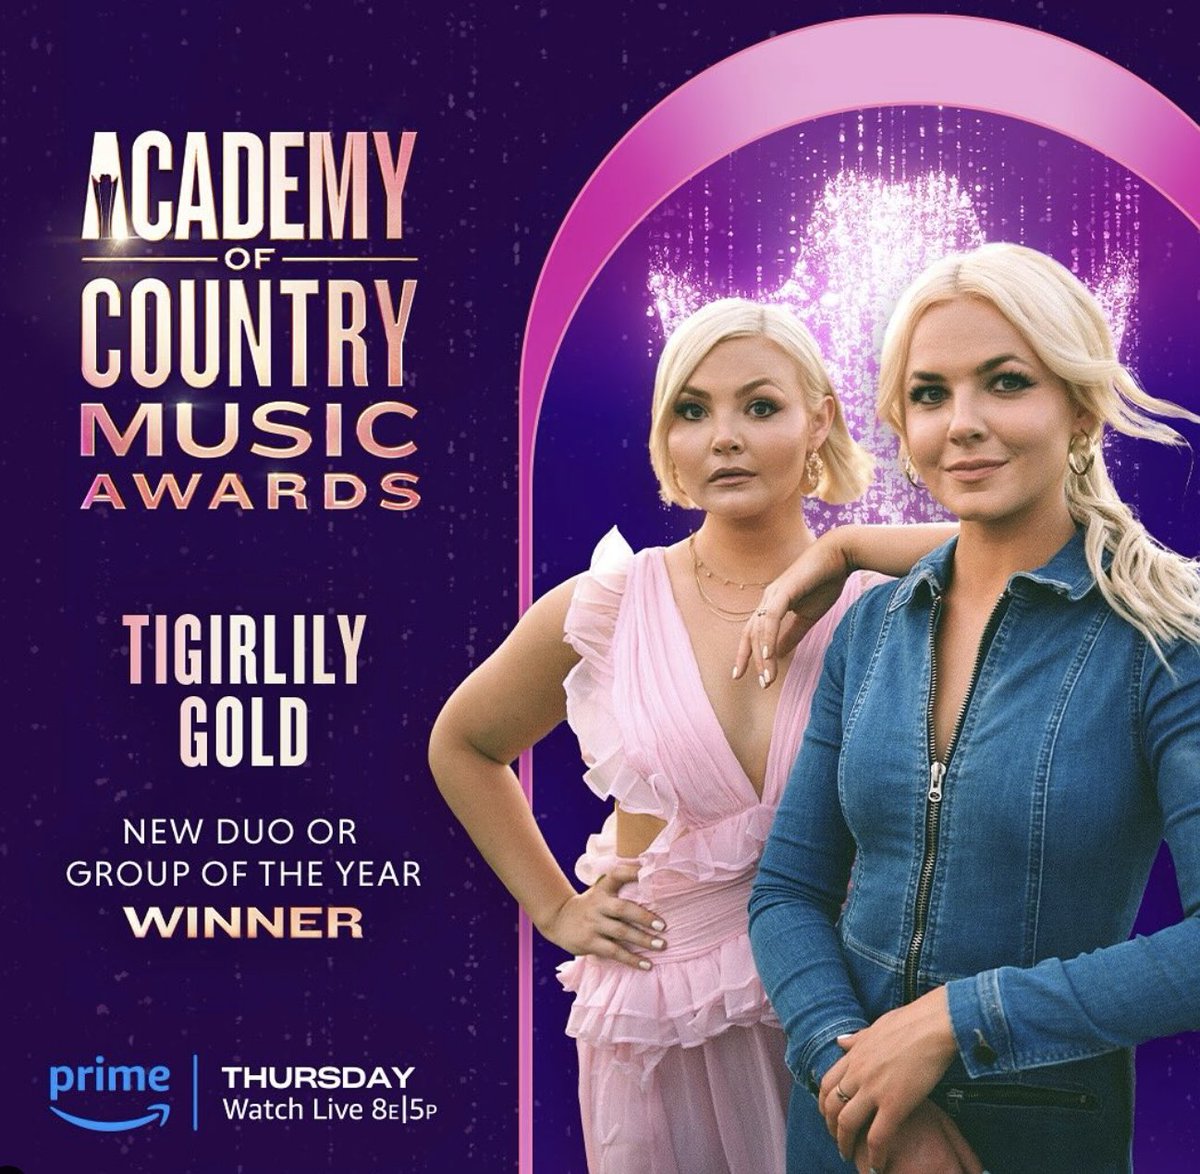 Congratulations are in order for these Hazen, ND natives! 🎉 Country music duo Tigirlily Gold has won the Academy of Country Music New Duo or Group of the Year award, announced yesterday at a kickoff festival ahead of tomorrow's 59th @ACMawards. 🏆 📸 @tigirlily